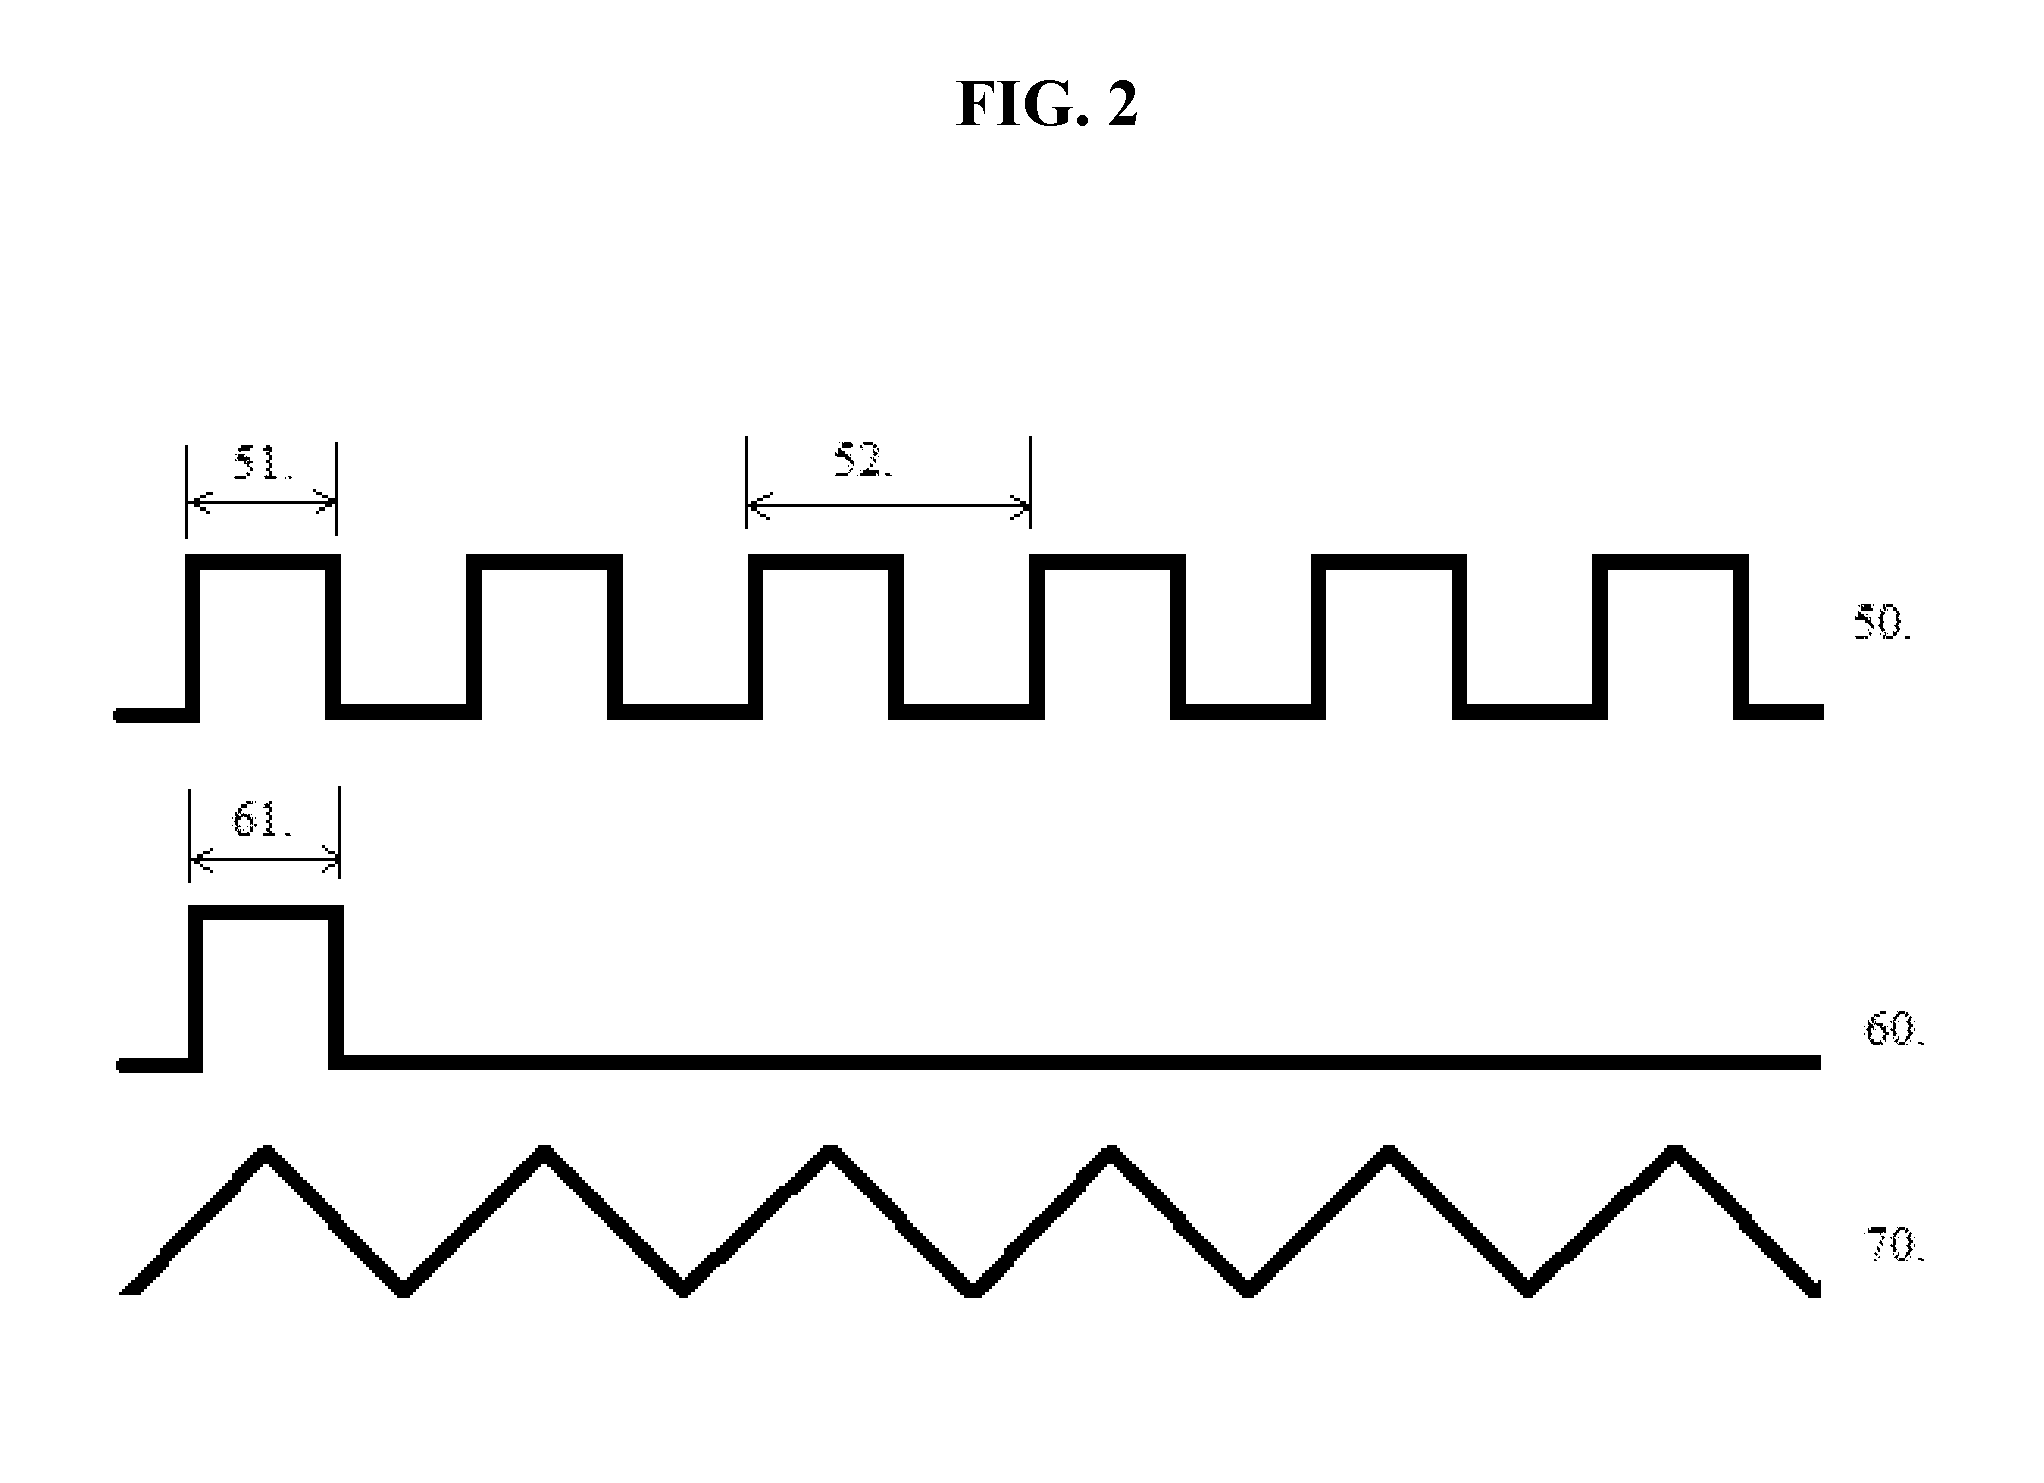 Periodic fringe imaging with structured pattern illumination and electronic rolling shutter detection